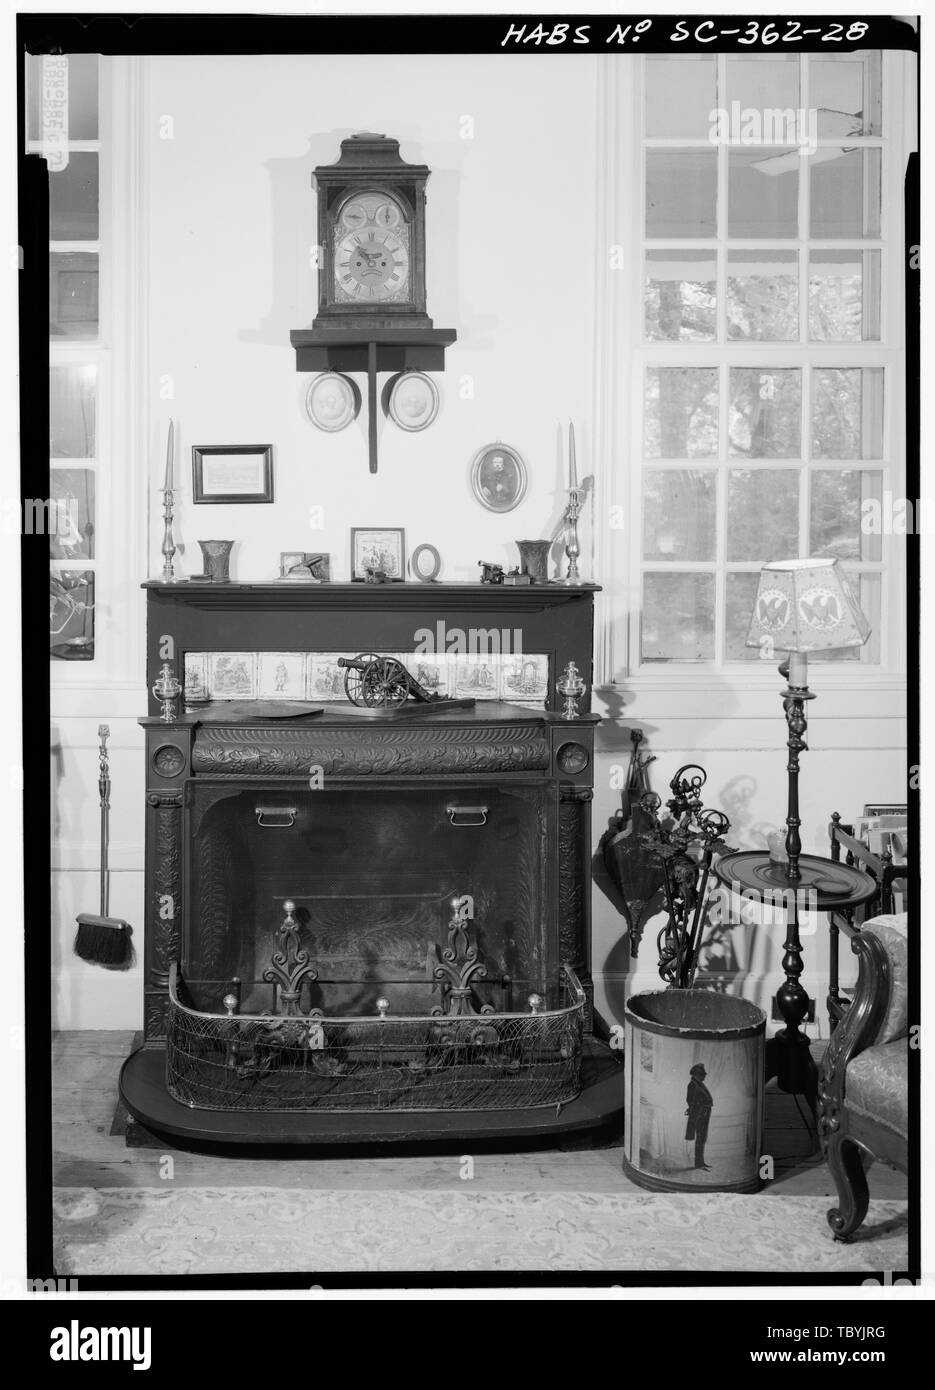 Franklin stove Black and White Stock Photos & Images - Alamy